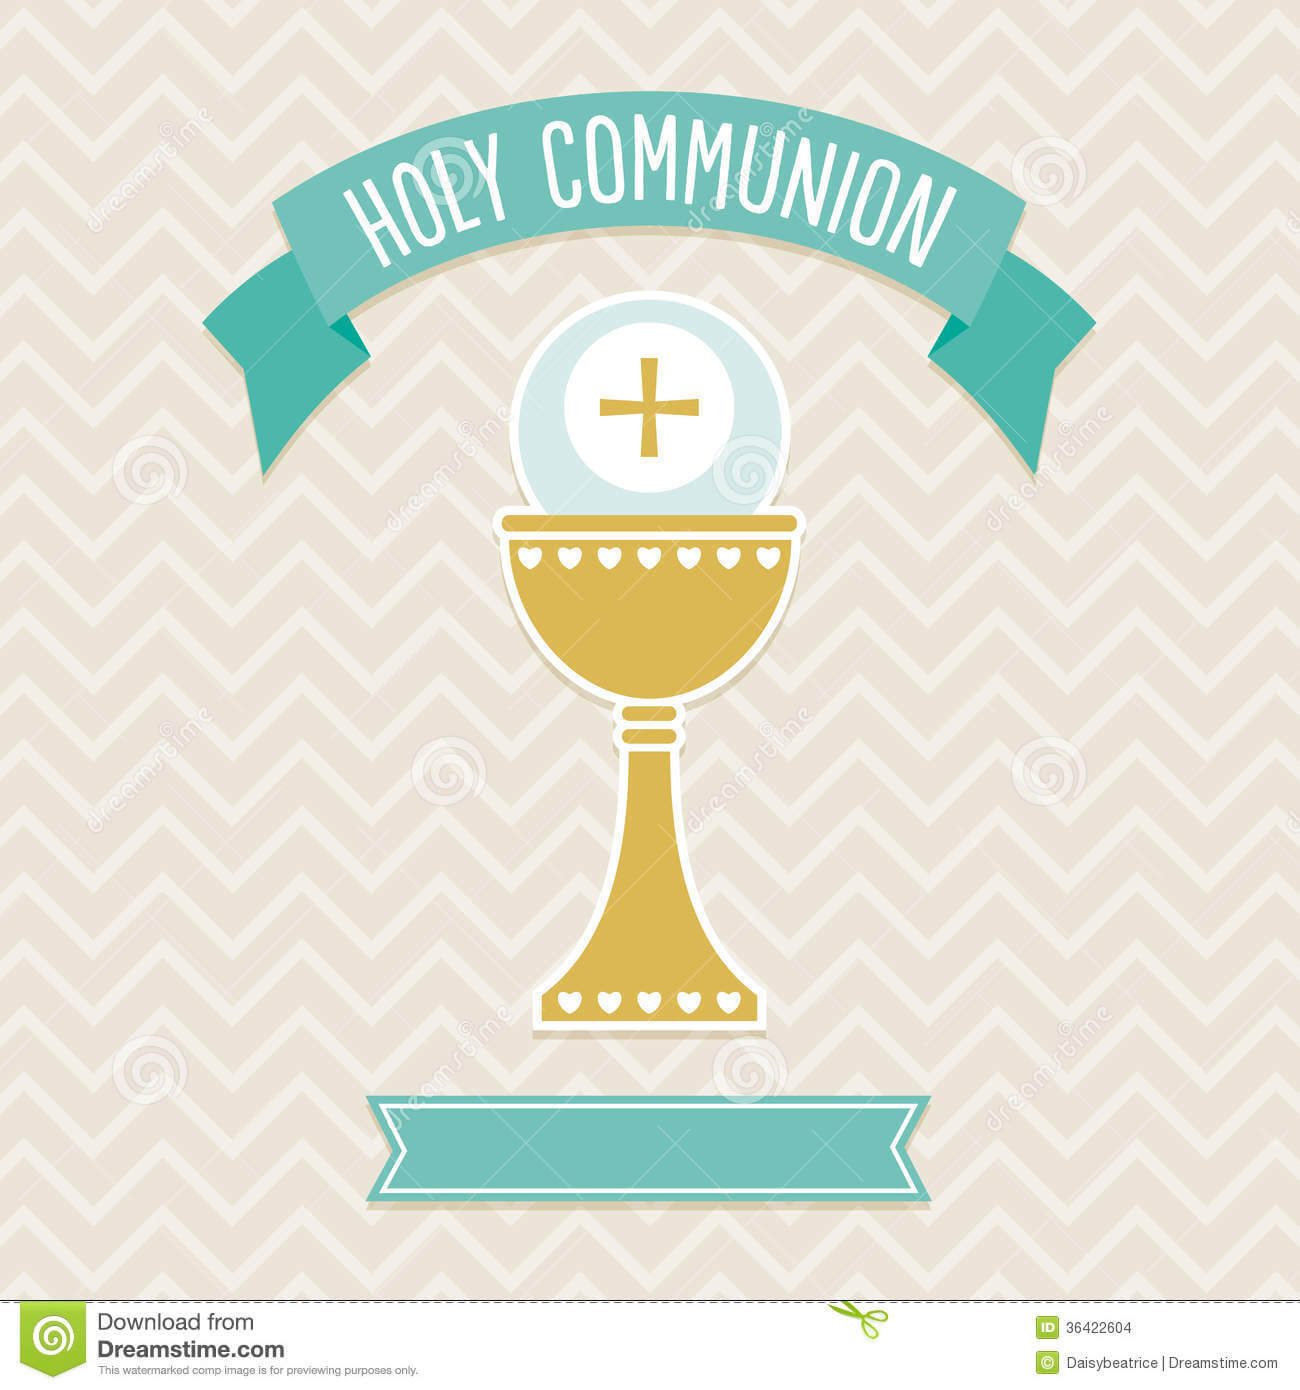 First Communion Banner Printable Templates (74+ Images In Inside Free Printable First Communion Banner Templates